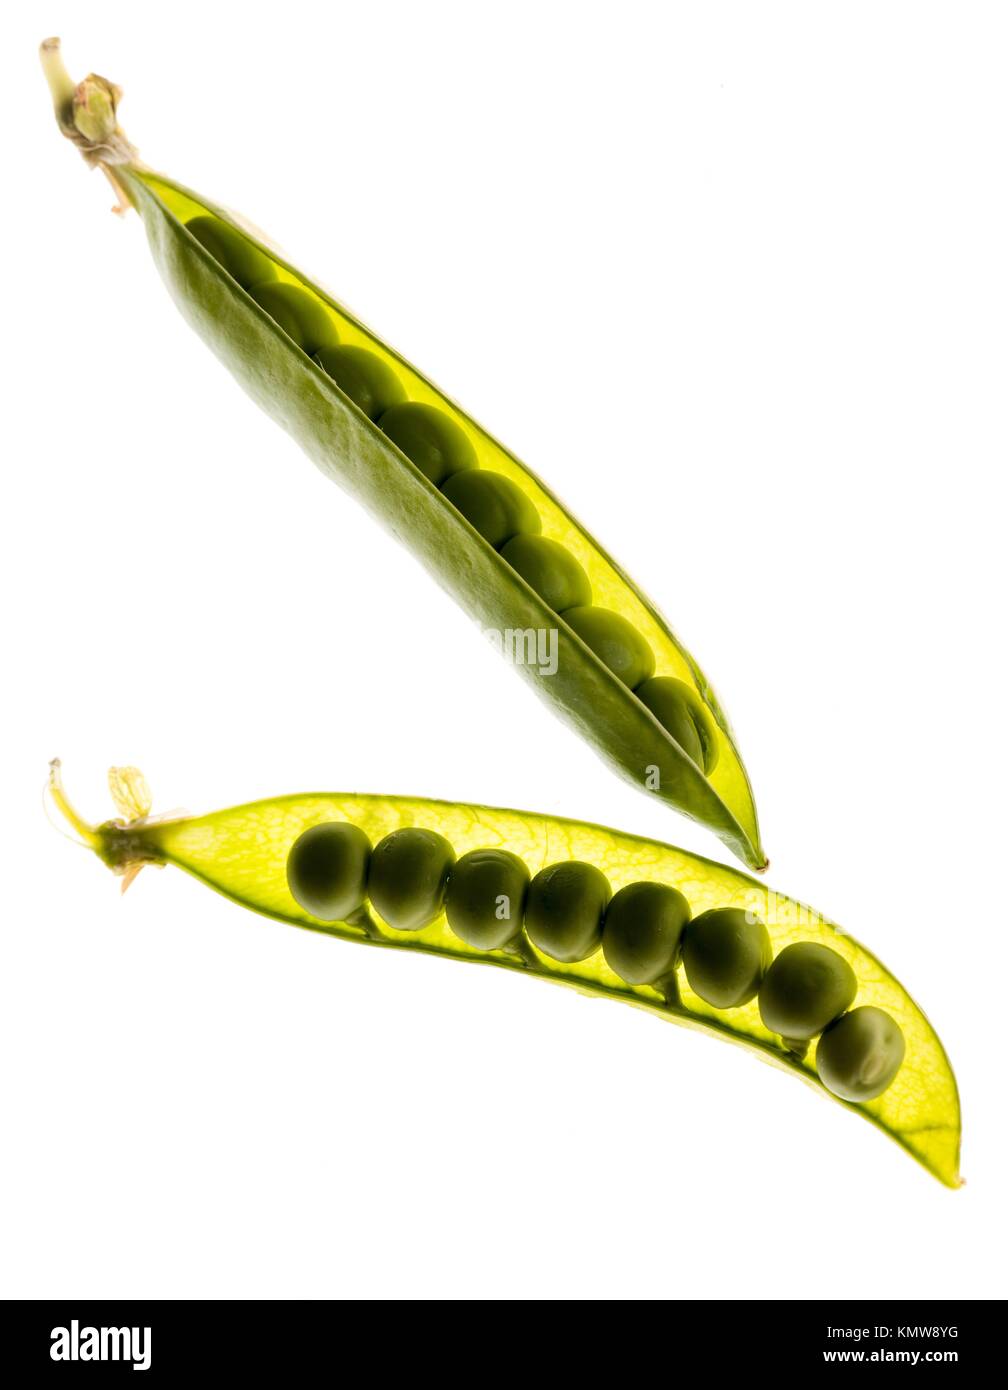 two opened pea pod over white background Stock Photo - Alamy